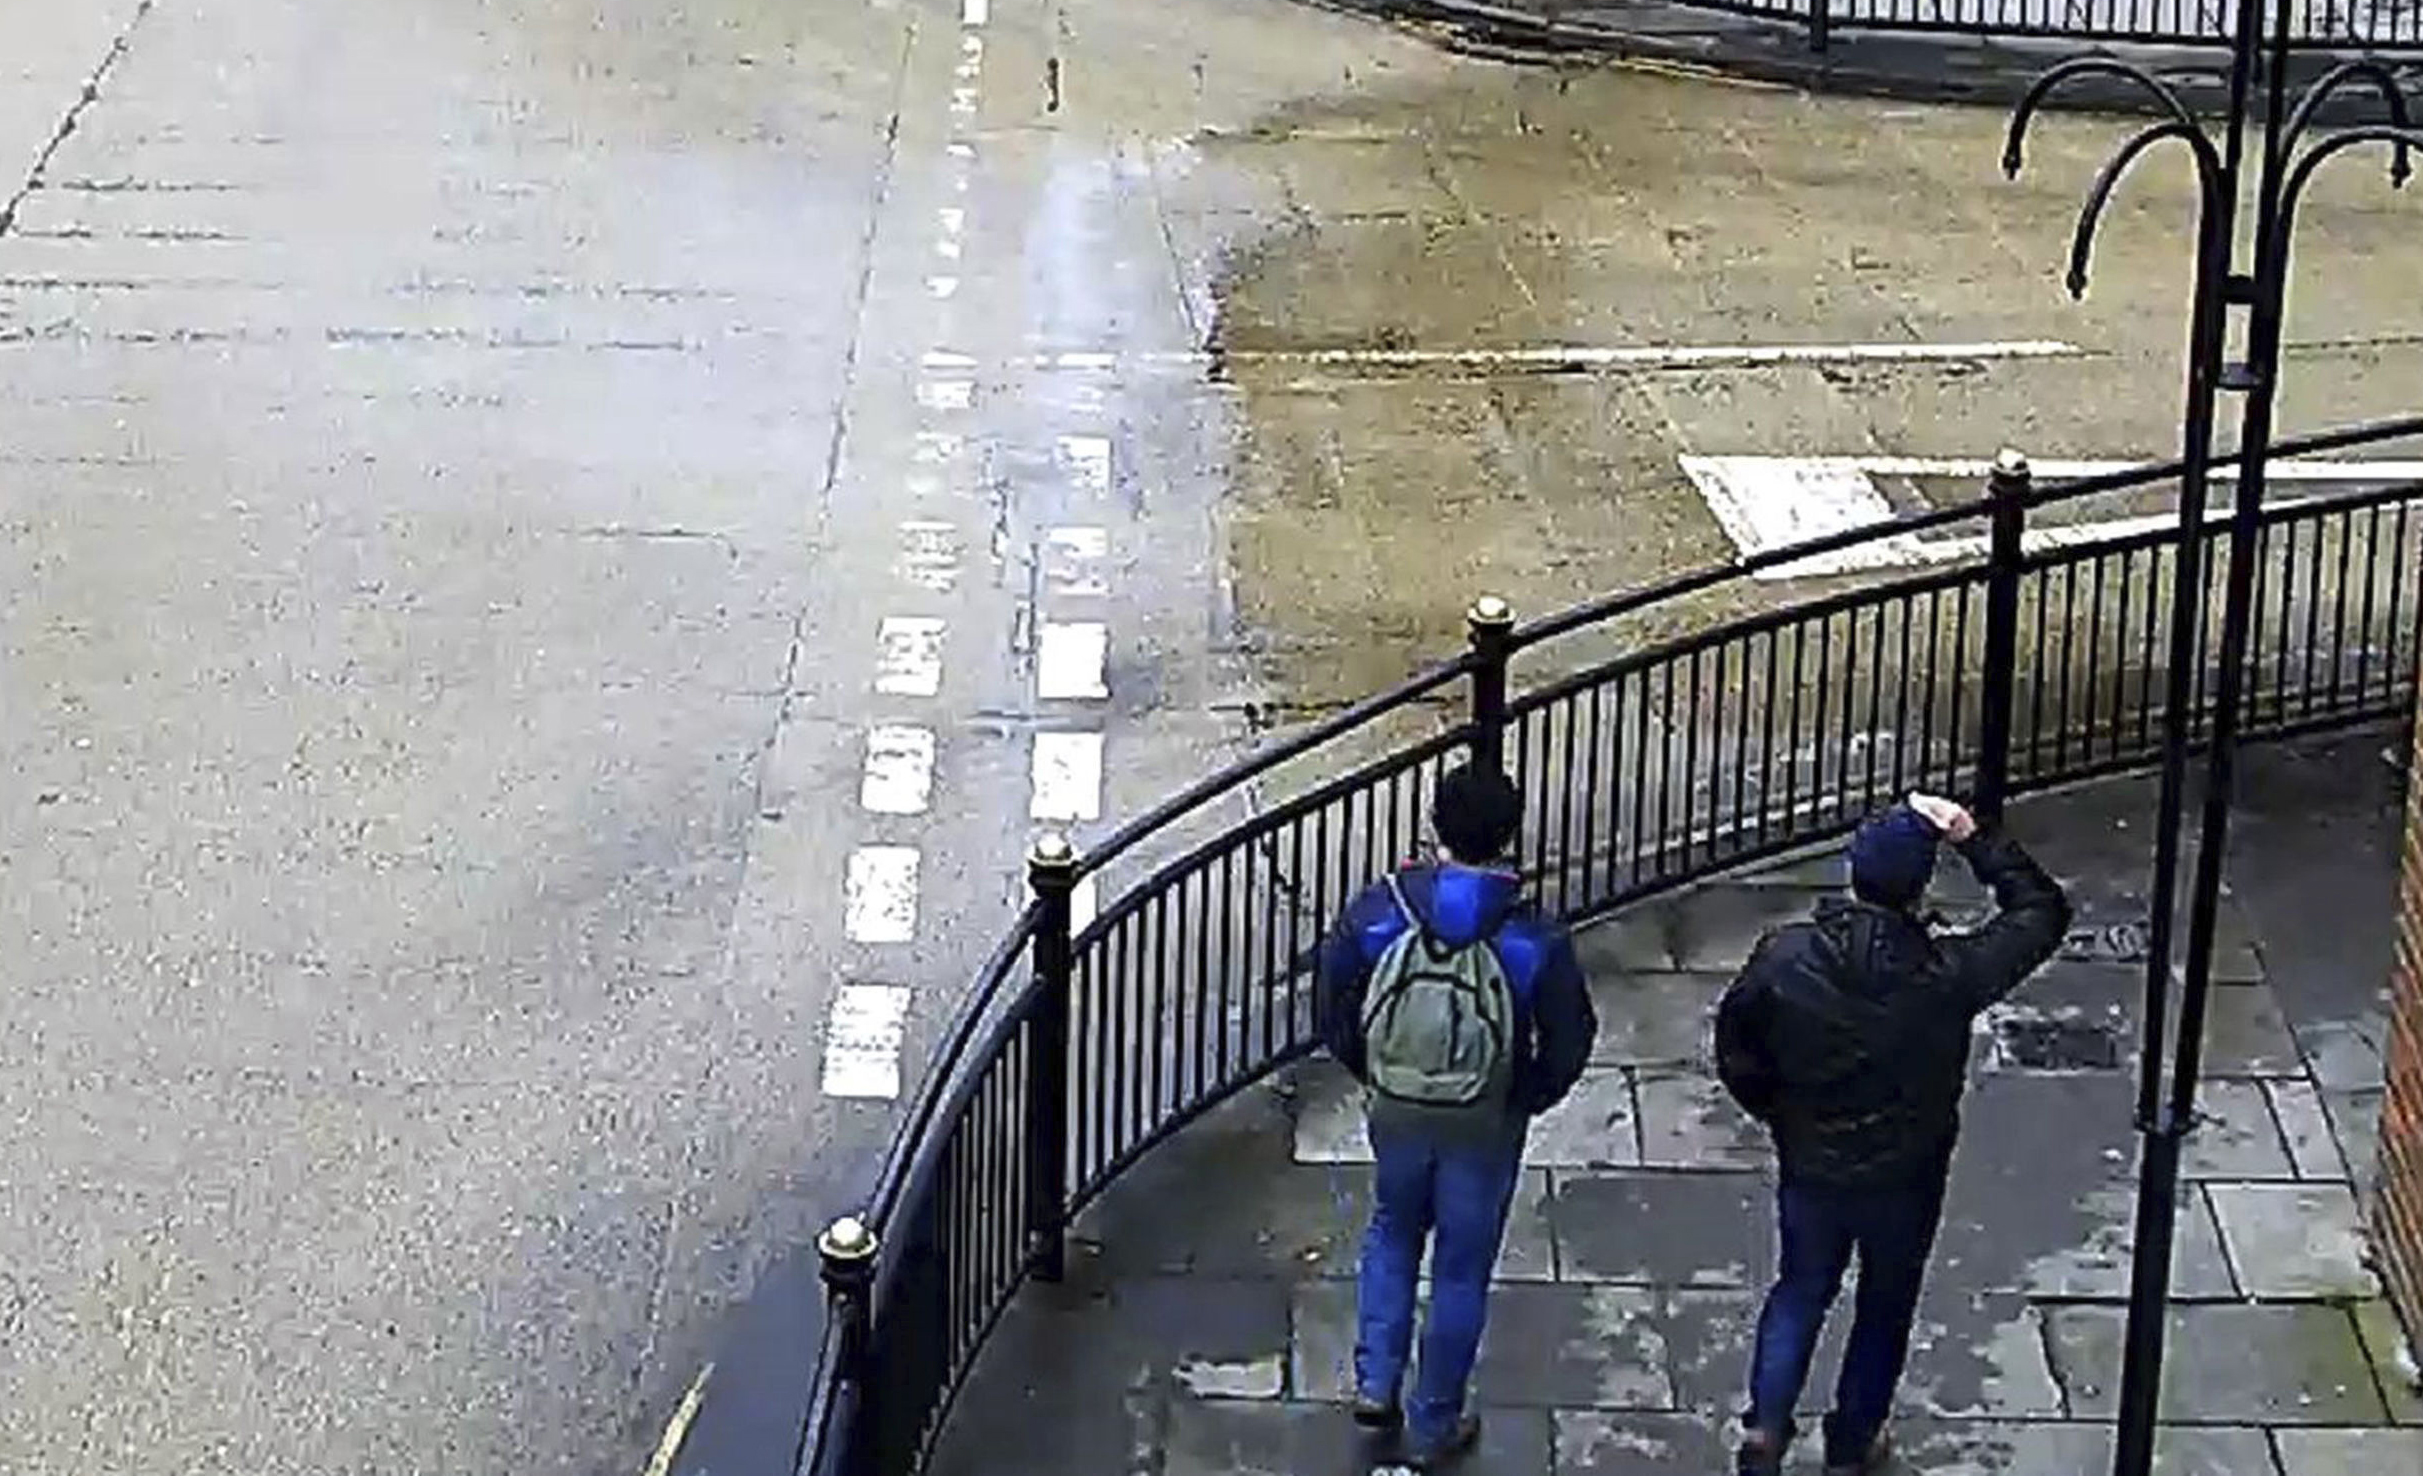 PHOTO: This still taken from CCTV and issued by the Metropolitan Police in London on Sept. 5, 2018, shows Ruslan Boshirov and Alexander Petrov on Fisherton Road, Salisbury, England, March 4, 2018.